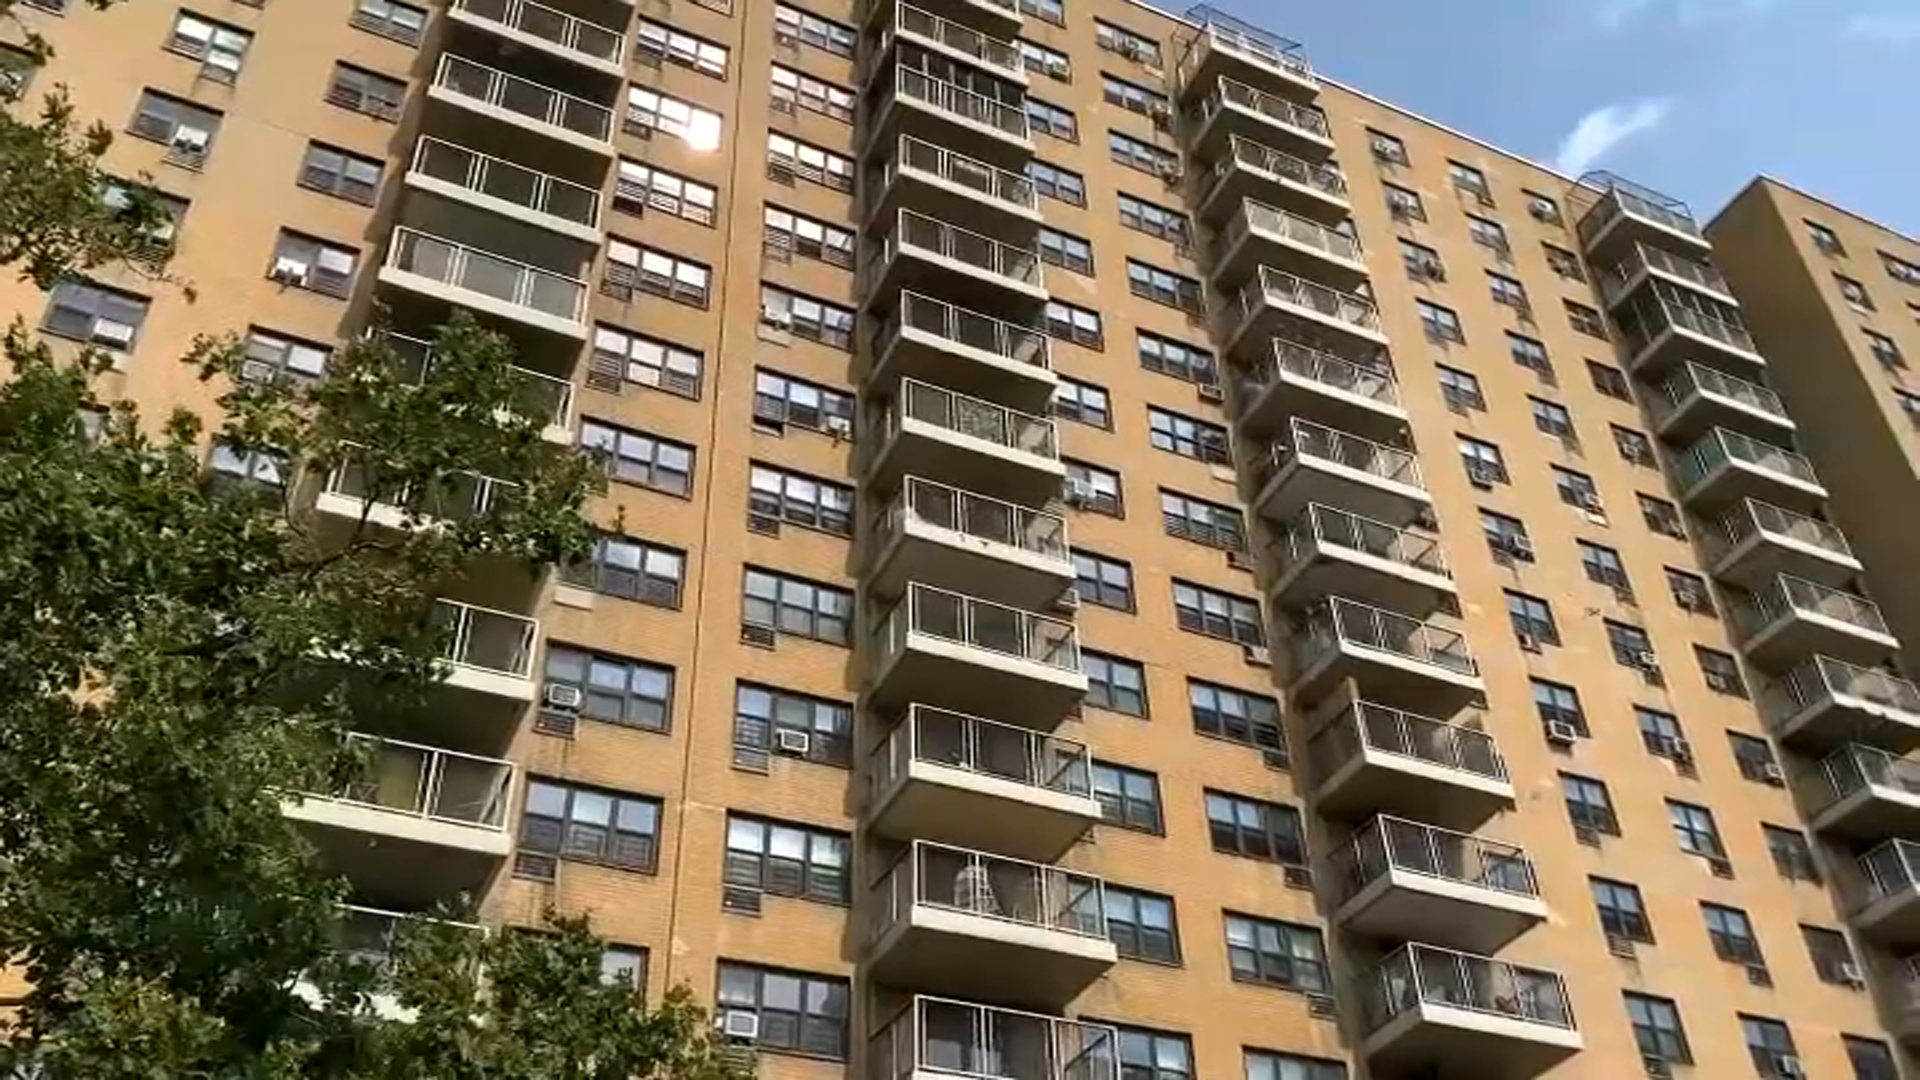 Strangers catch falling children from buildings in New York and